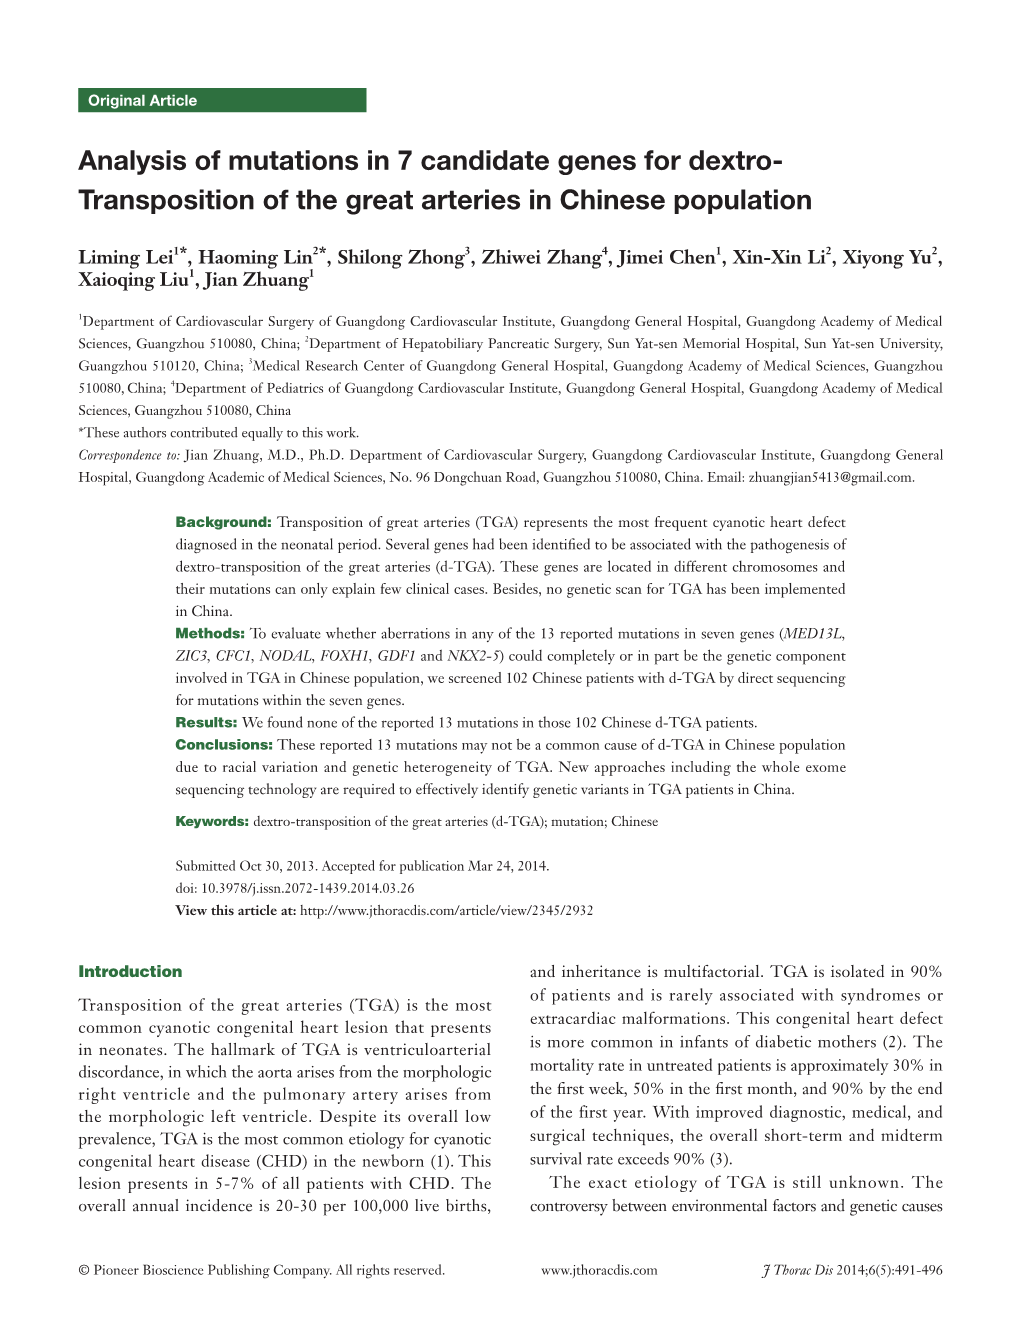 Analysis of Mutations in 7 Candidate Genes for Dextro- Transposition of the Great Arteries in Chinese Population